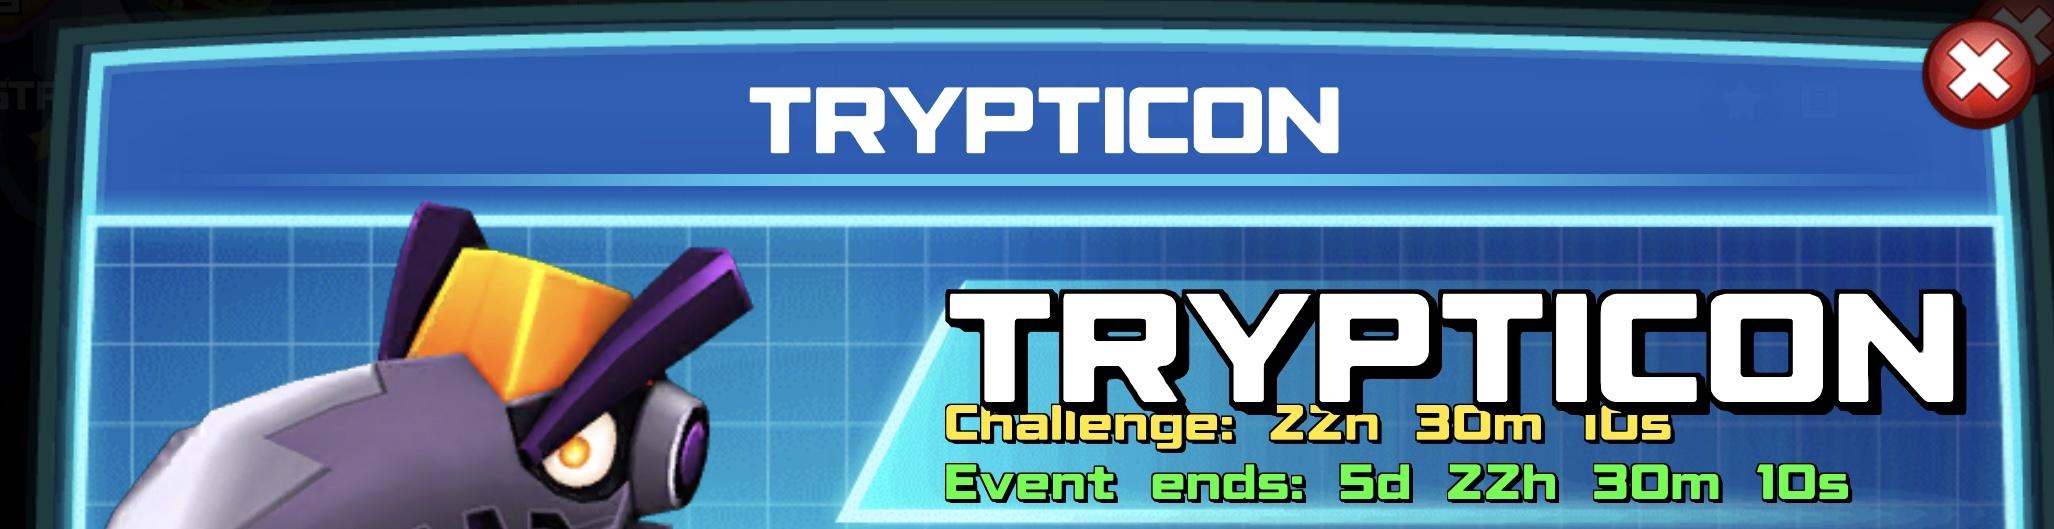 The event banner for Trypticon